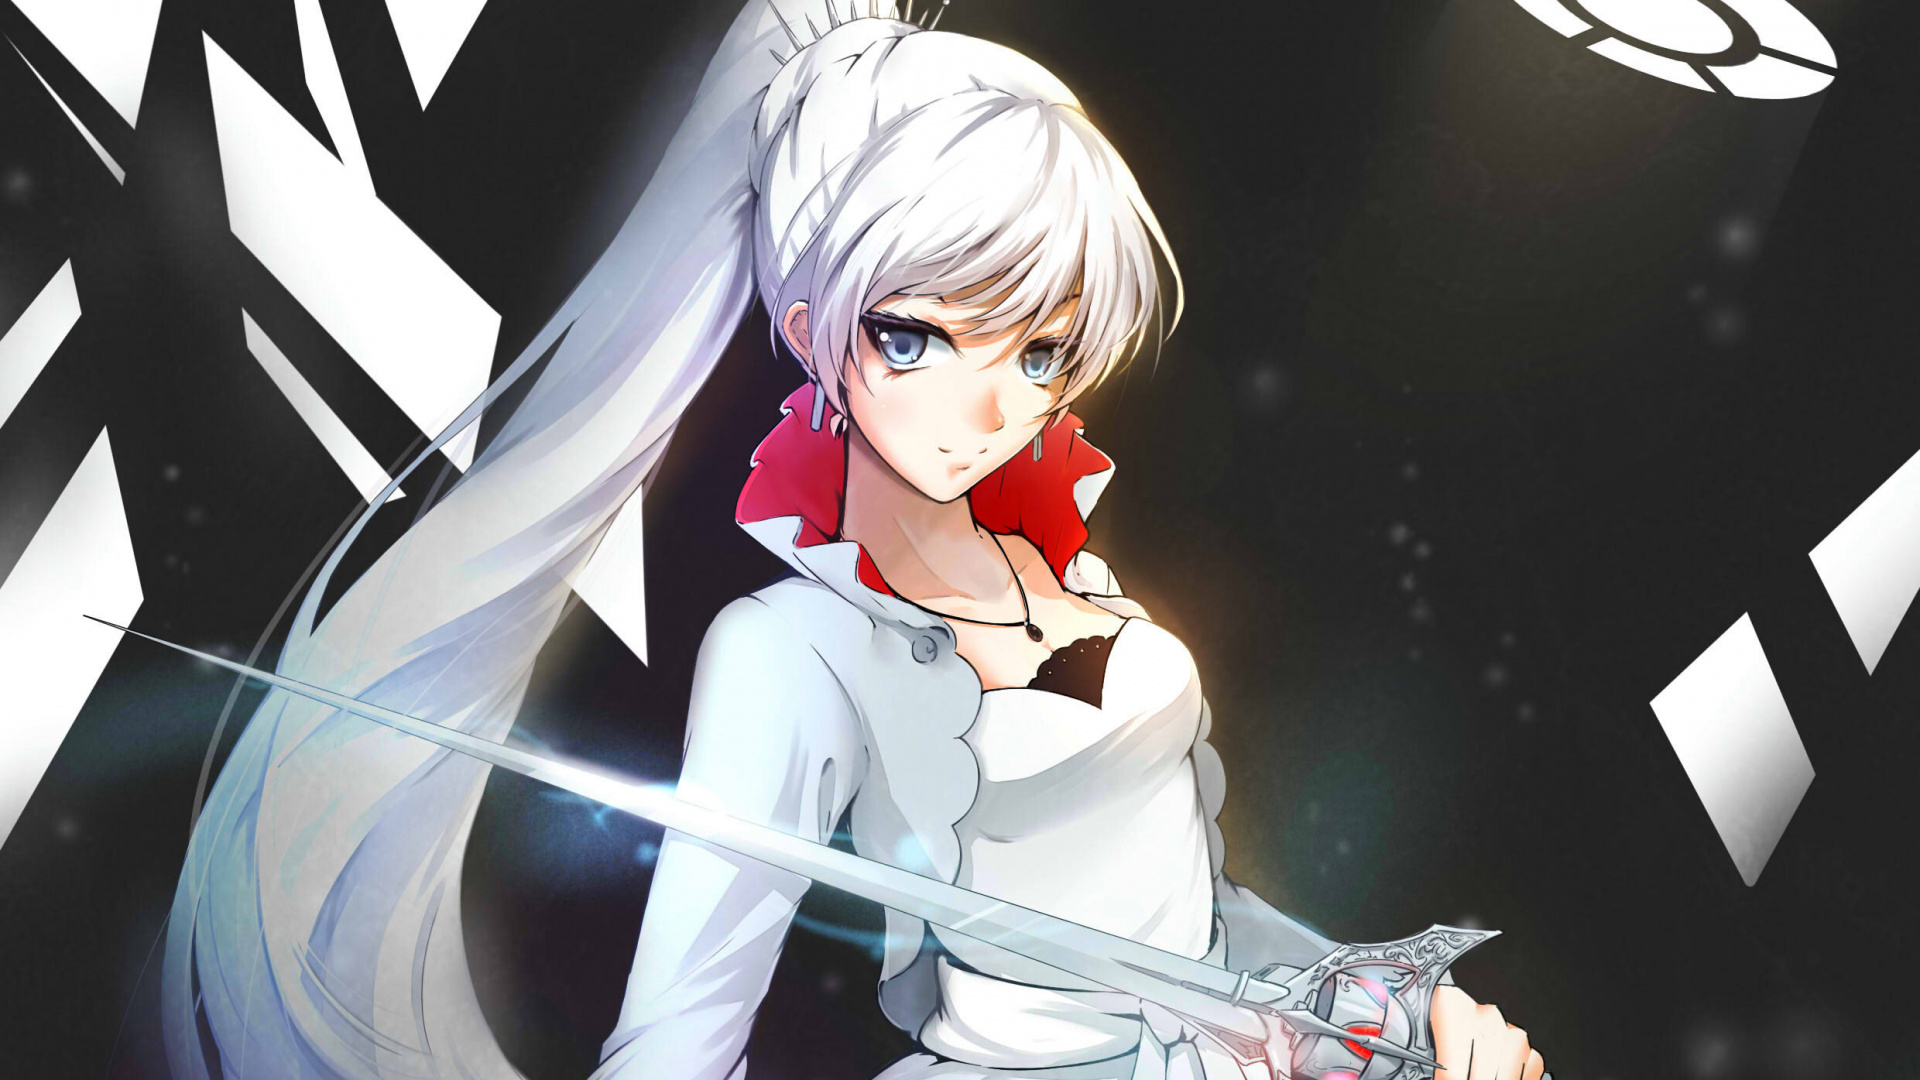 Woman in White Blazer Anime Character. Wallpaper in 1920x1080 Resolution